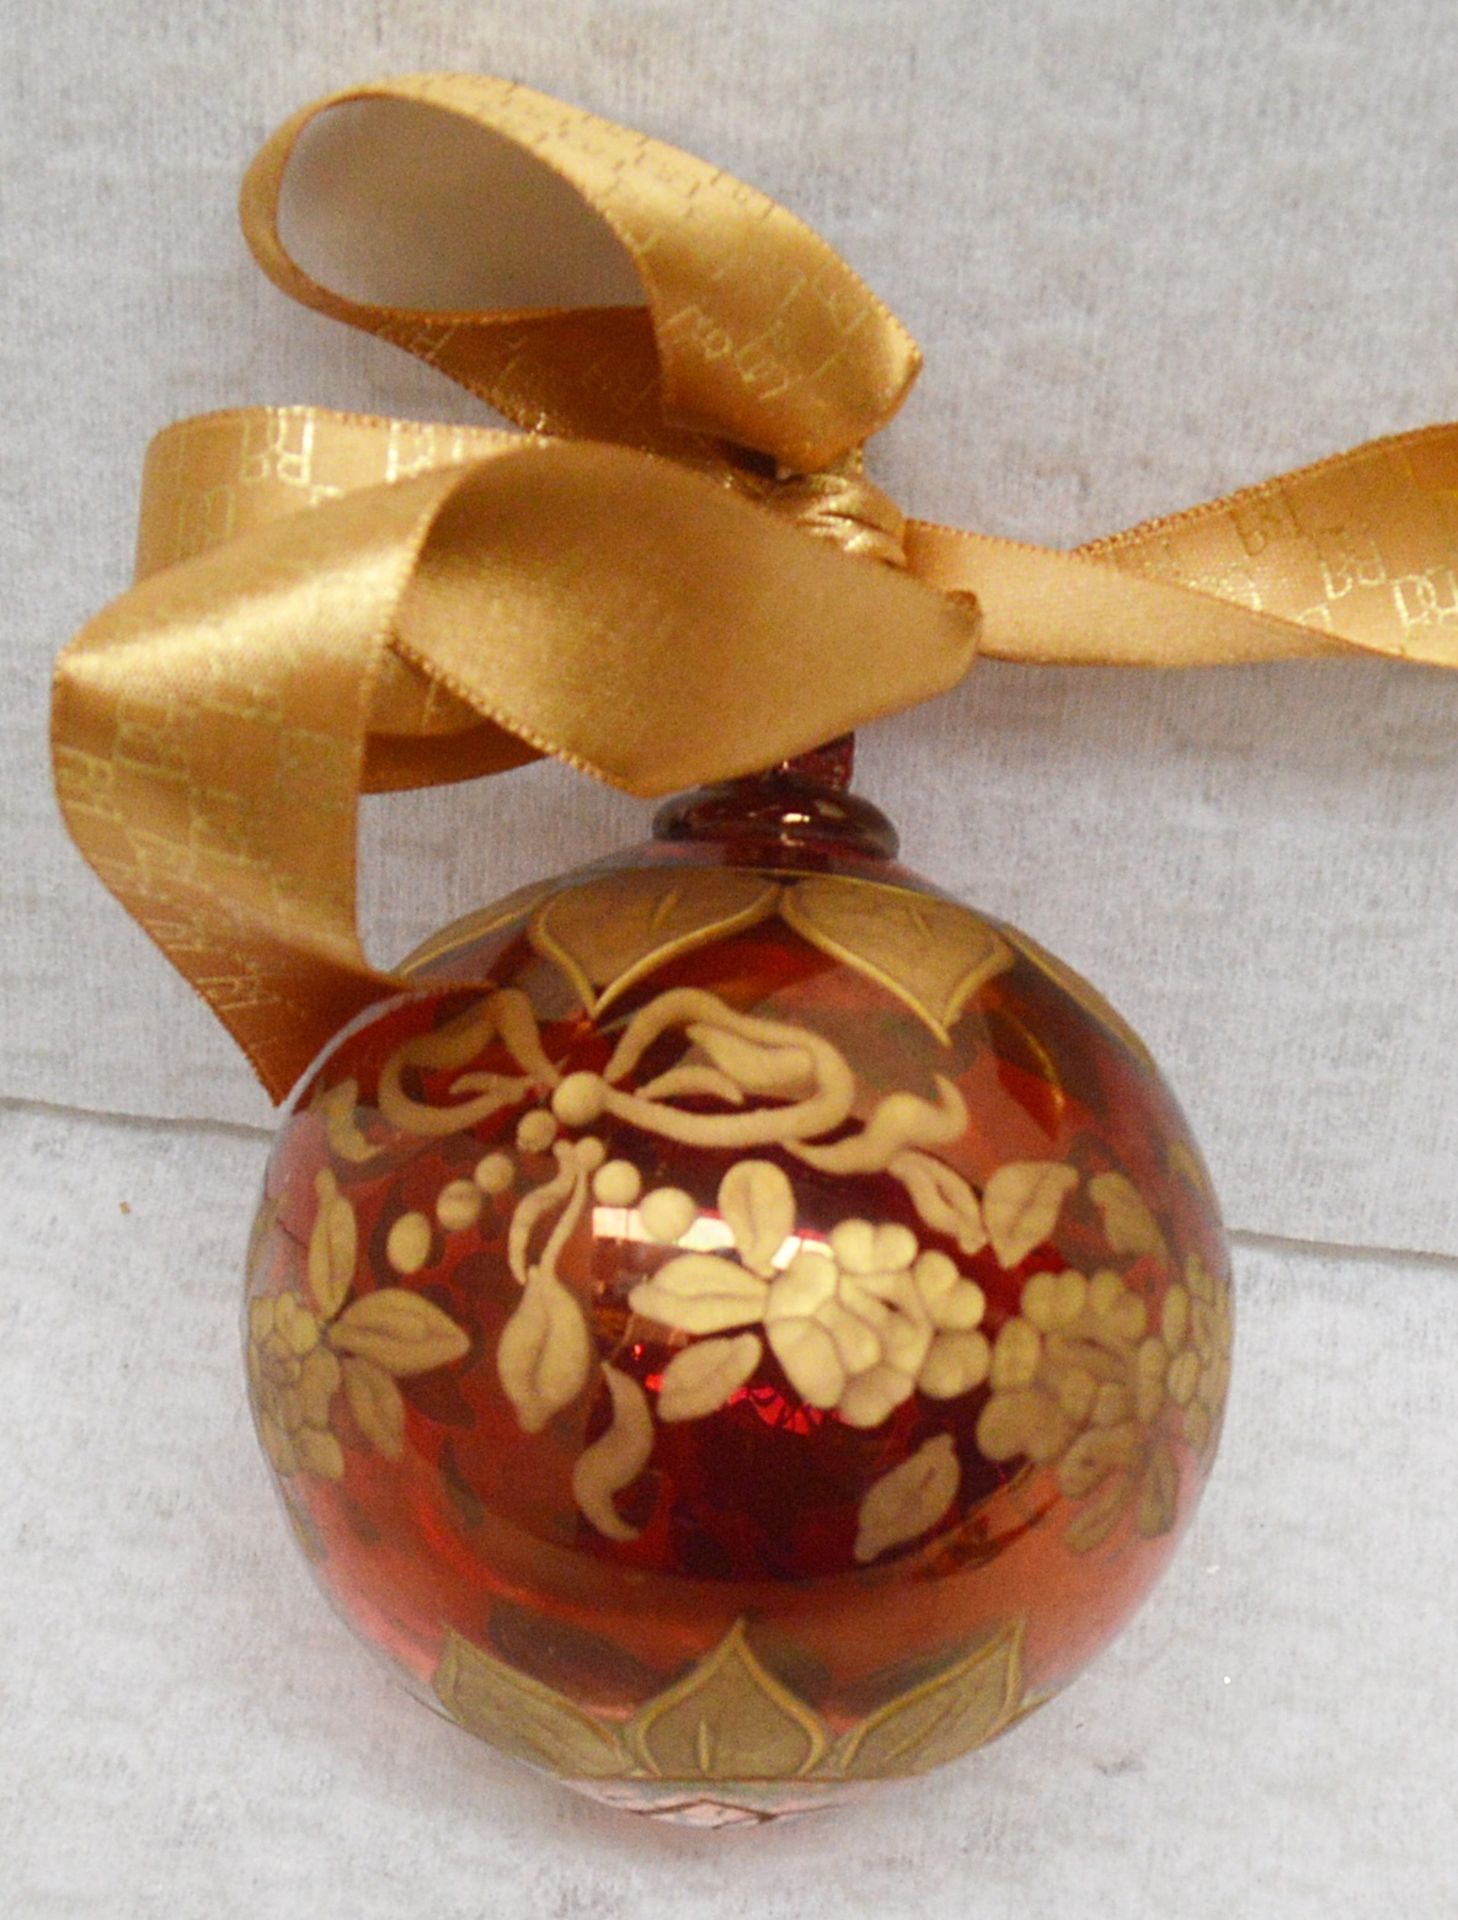 5 x BALDI 'Home Jewels' Italian Hand-crafted Artisan Glass Christmas Tree Decorations In Red / Gold - Image 3 of 4